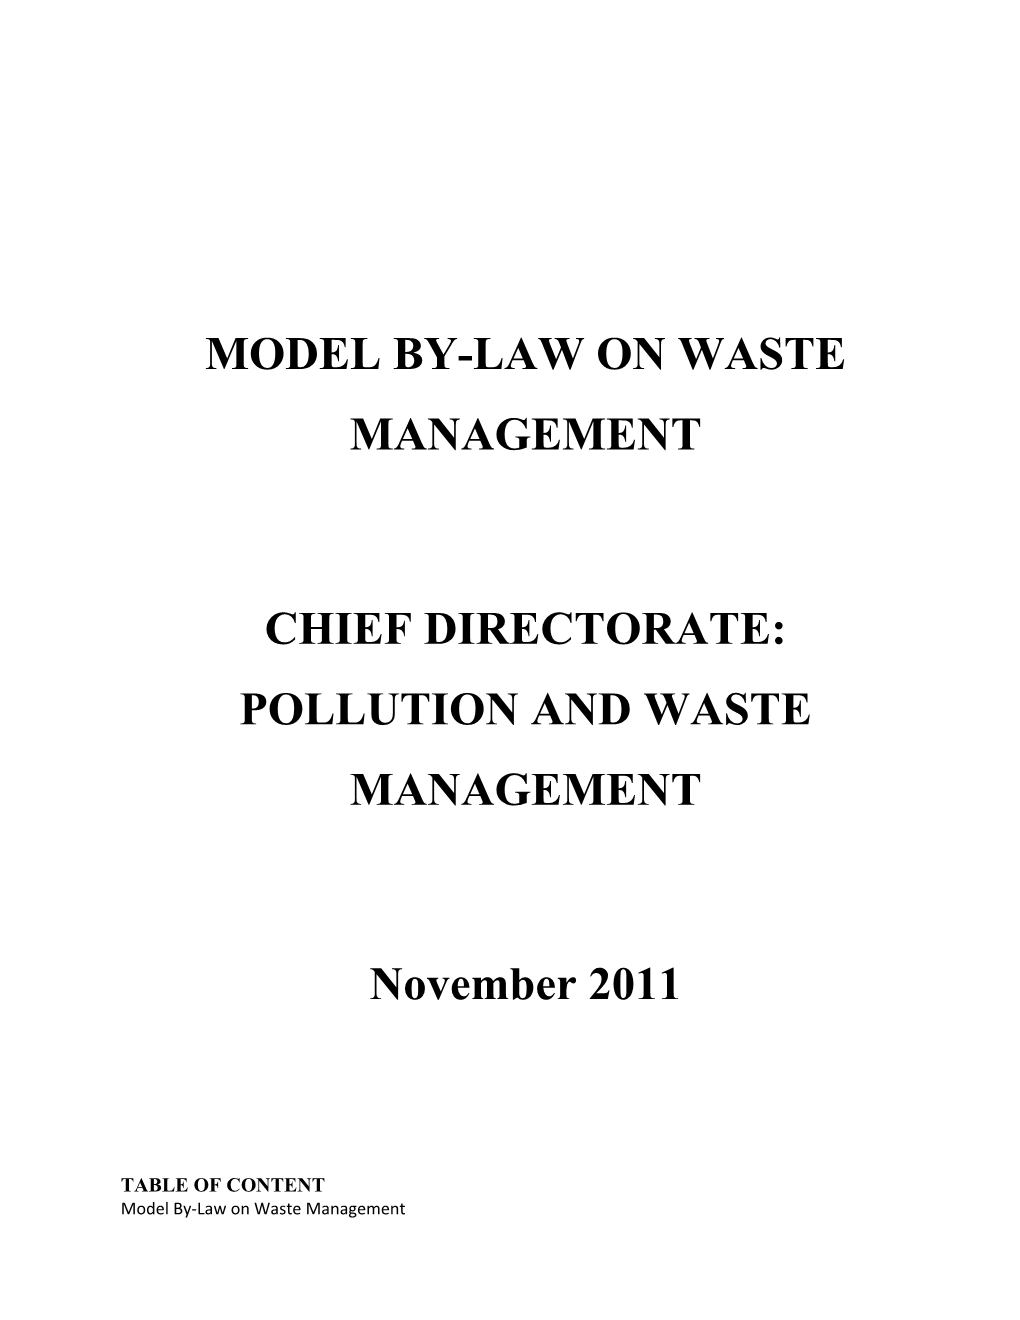 Model By-Law on Waste Management